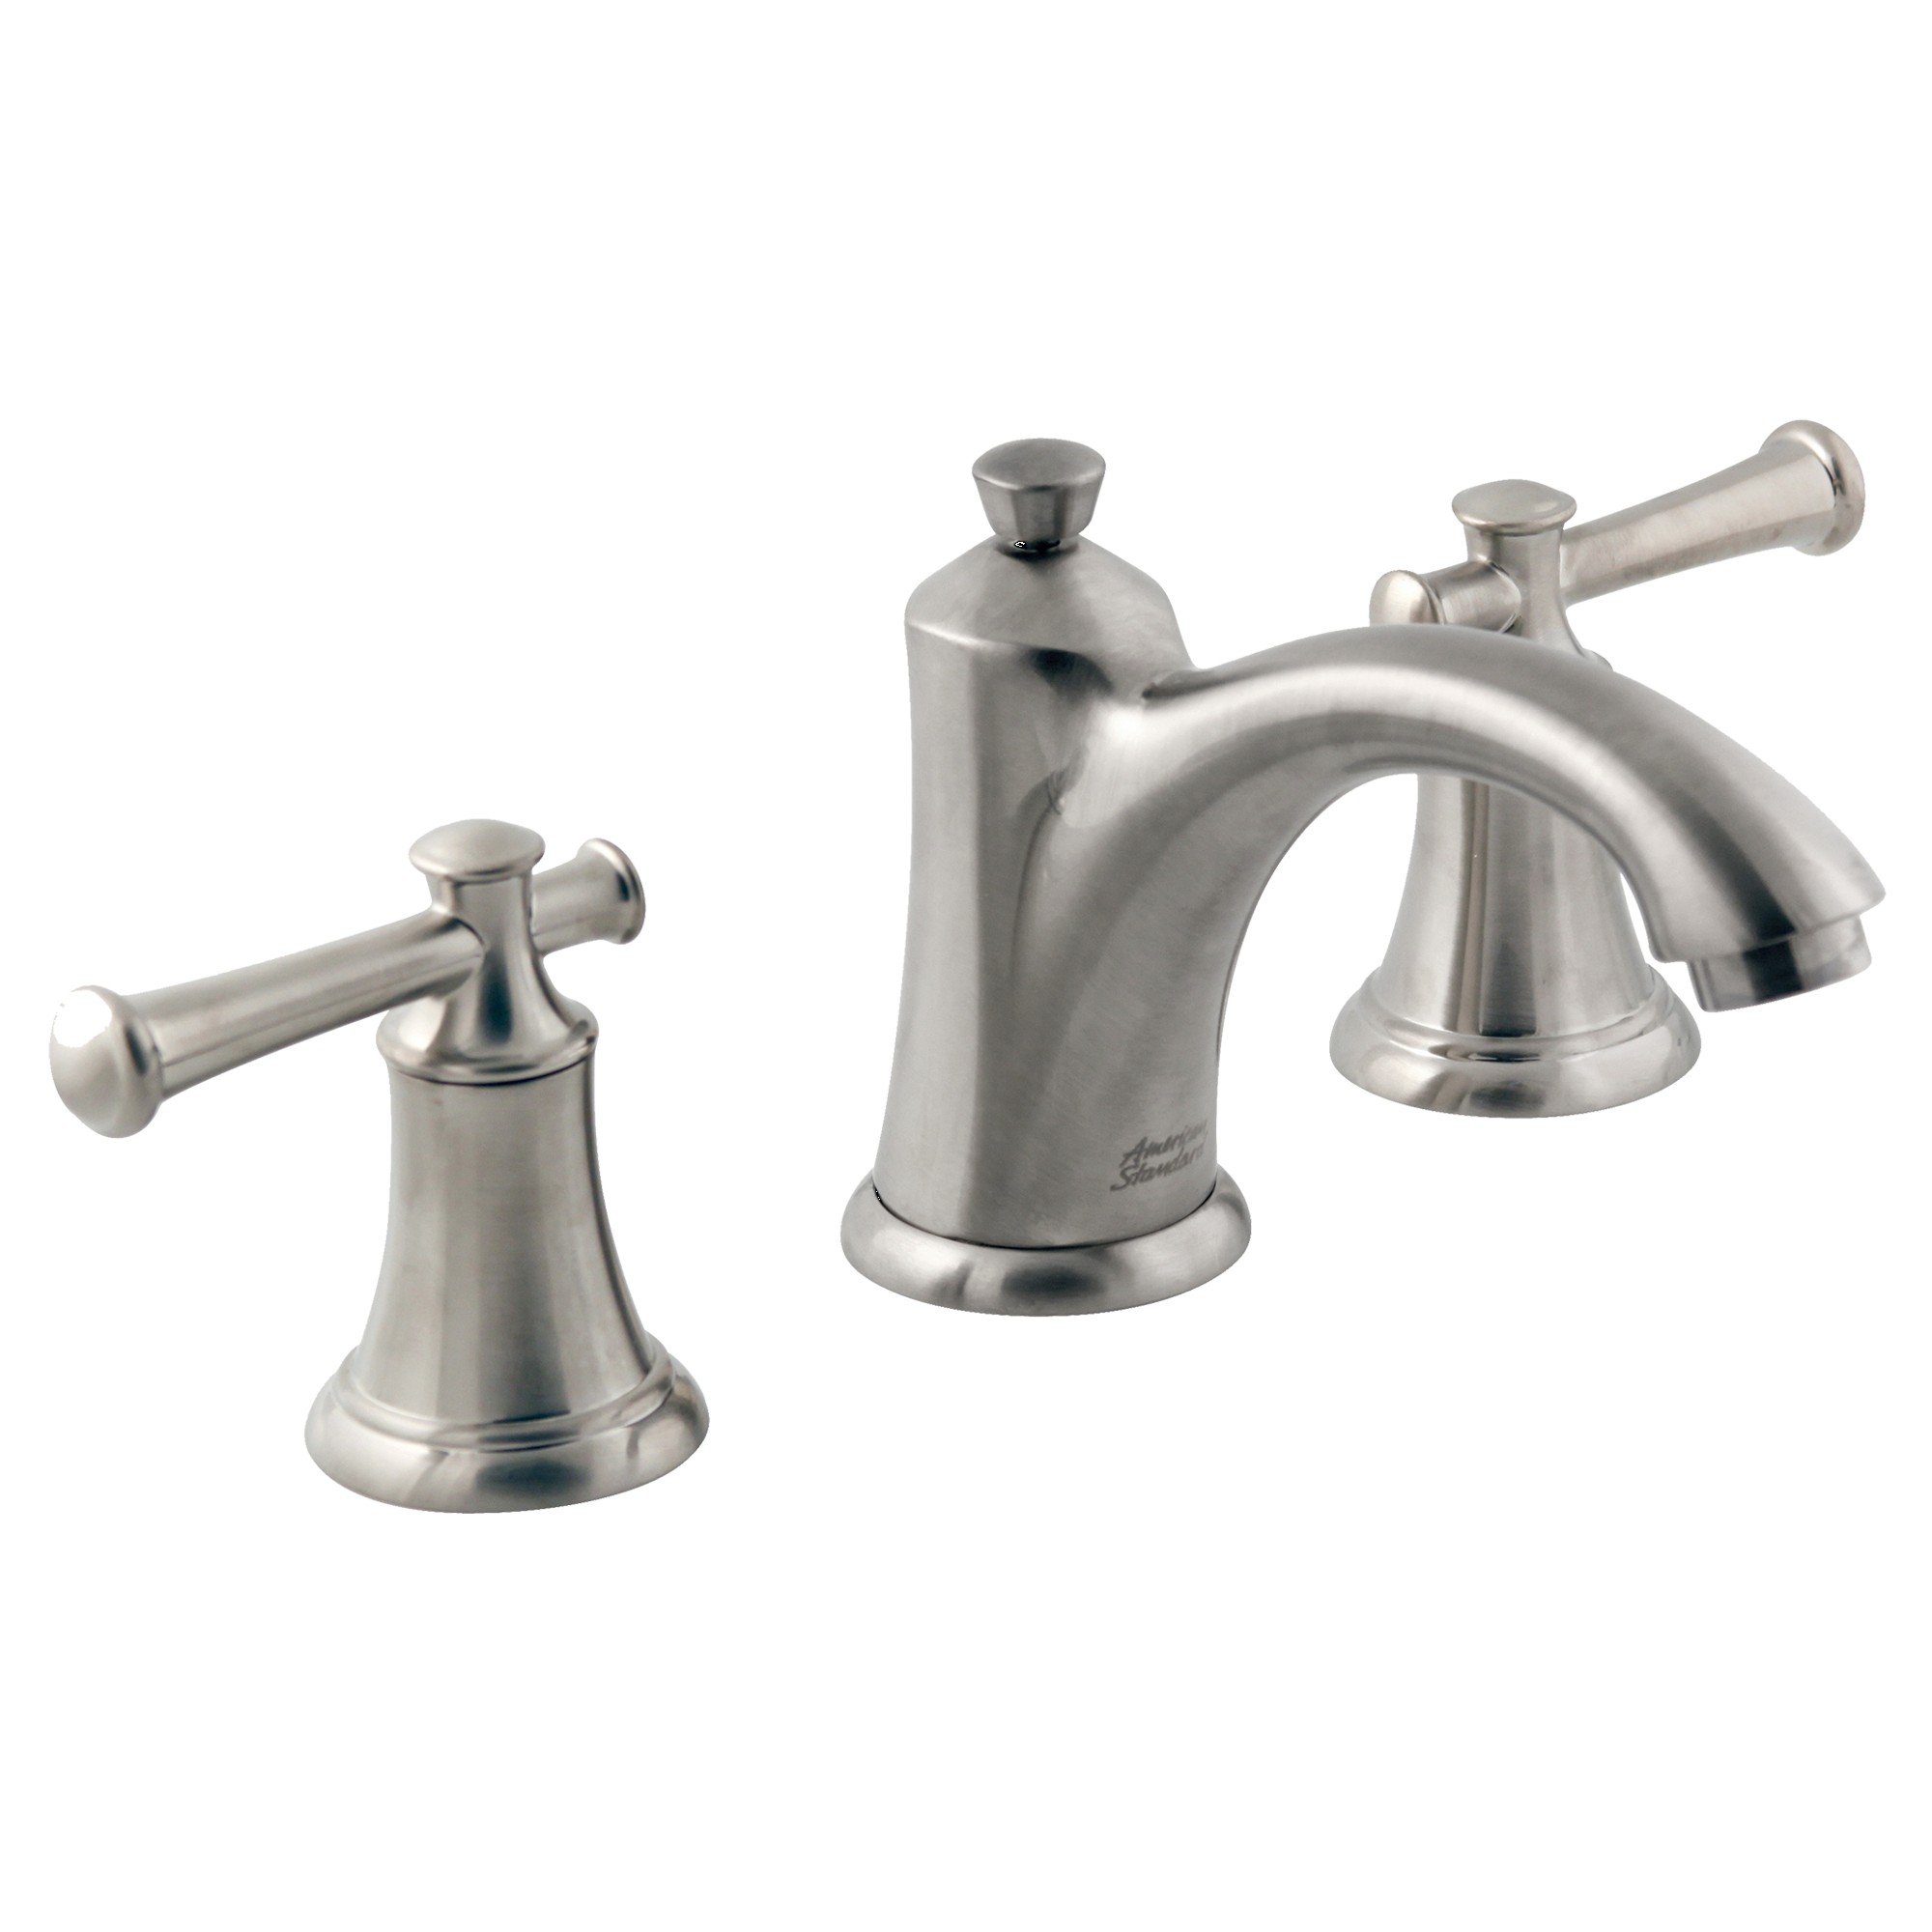 American Standard | 7415.801.295 | AMERICAN STANDARD 7415.801 PORTSMOUTH WIDESPREAD LAVATORY FAUCET WITH POP-UP & LEVER HANDLES SN 295 SATIN NICKEL